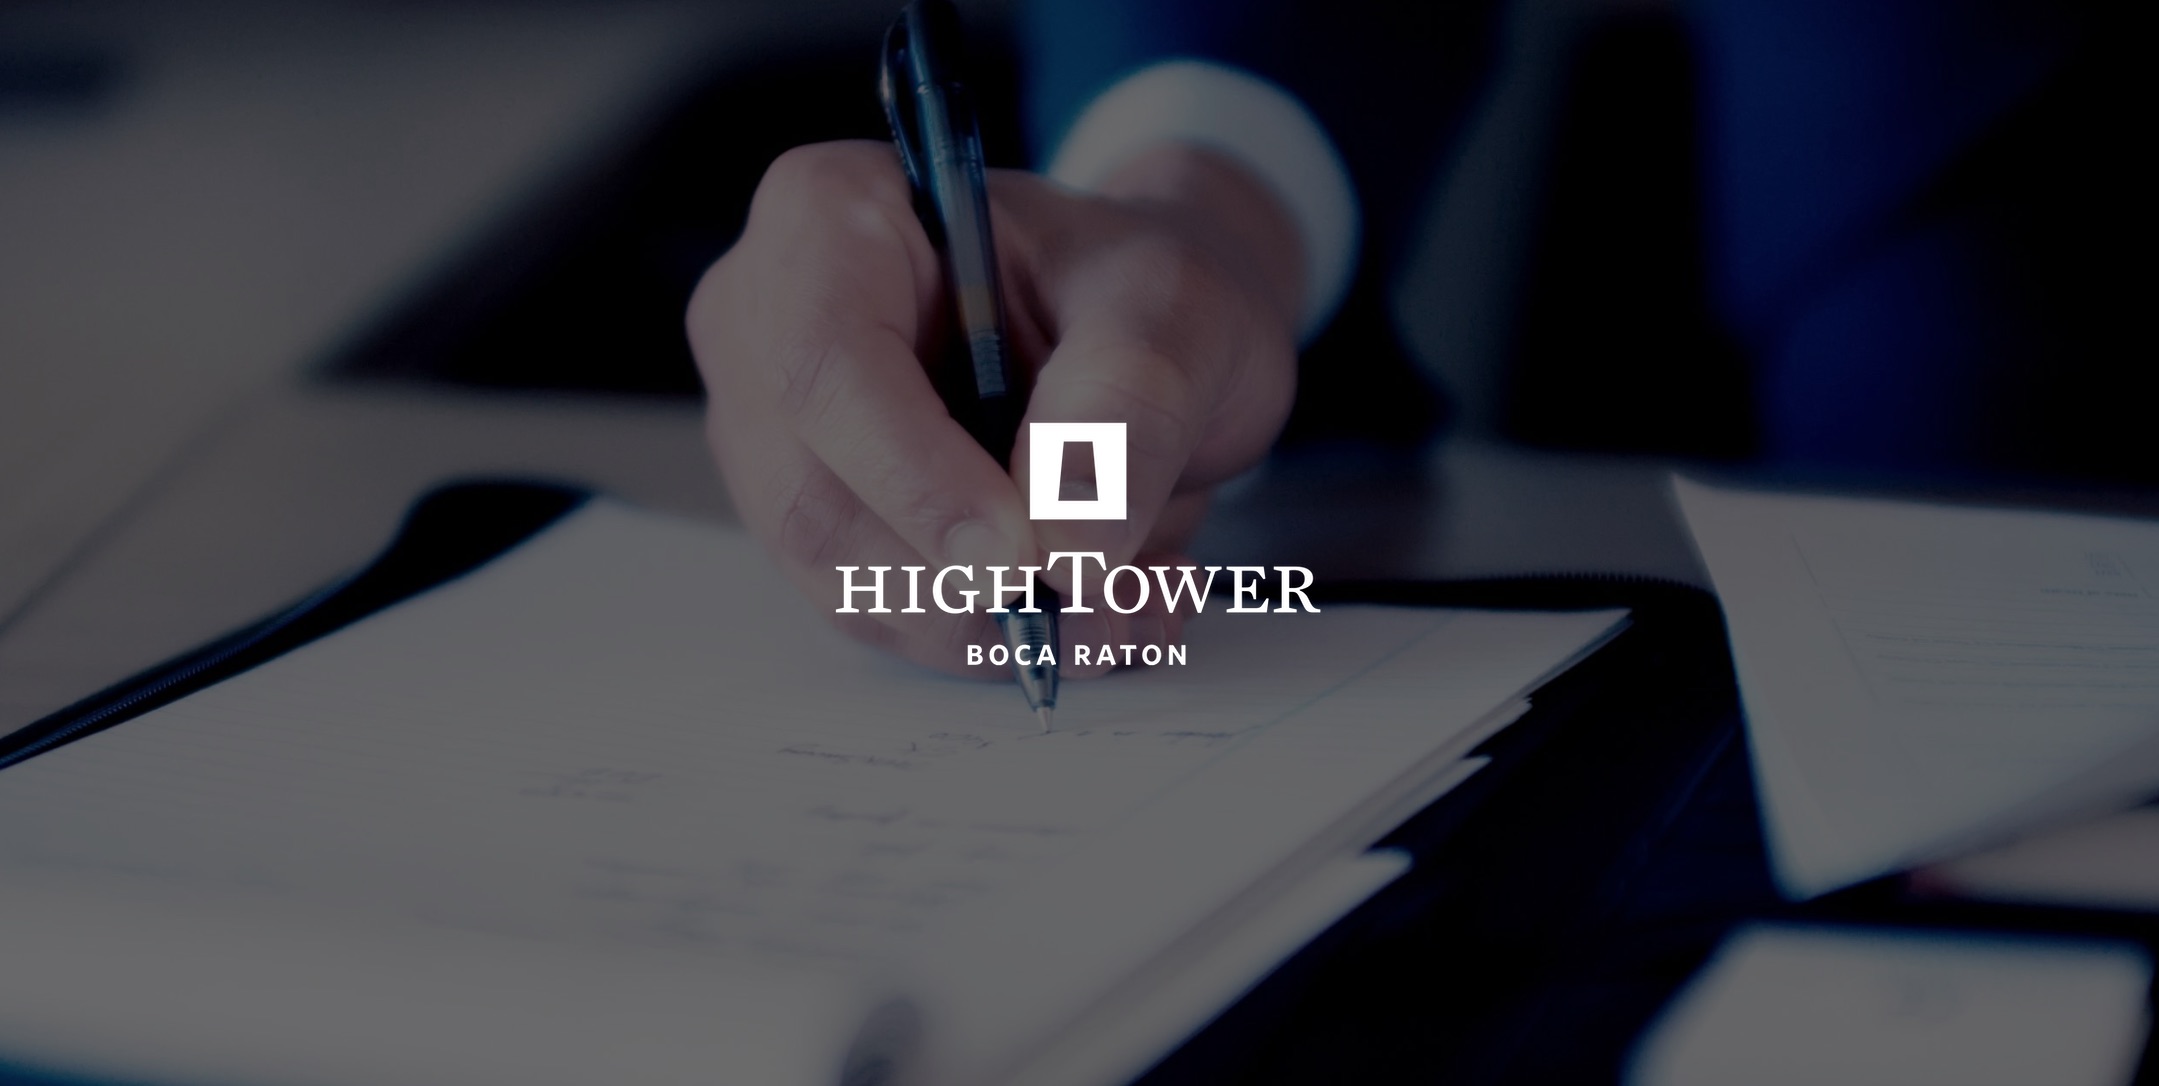 Hightower Financial Advisors Hightower White Boca Raton logo with background of a man with a pen writing something down in a notebook tablet